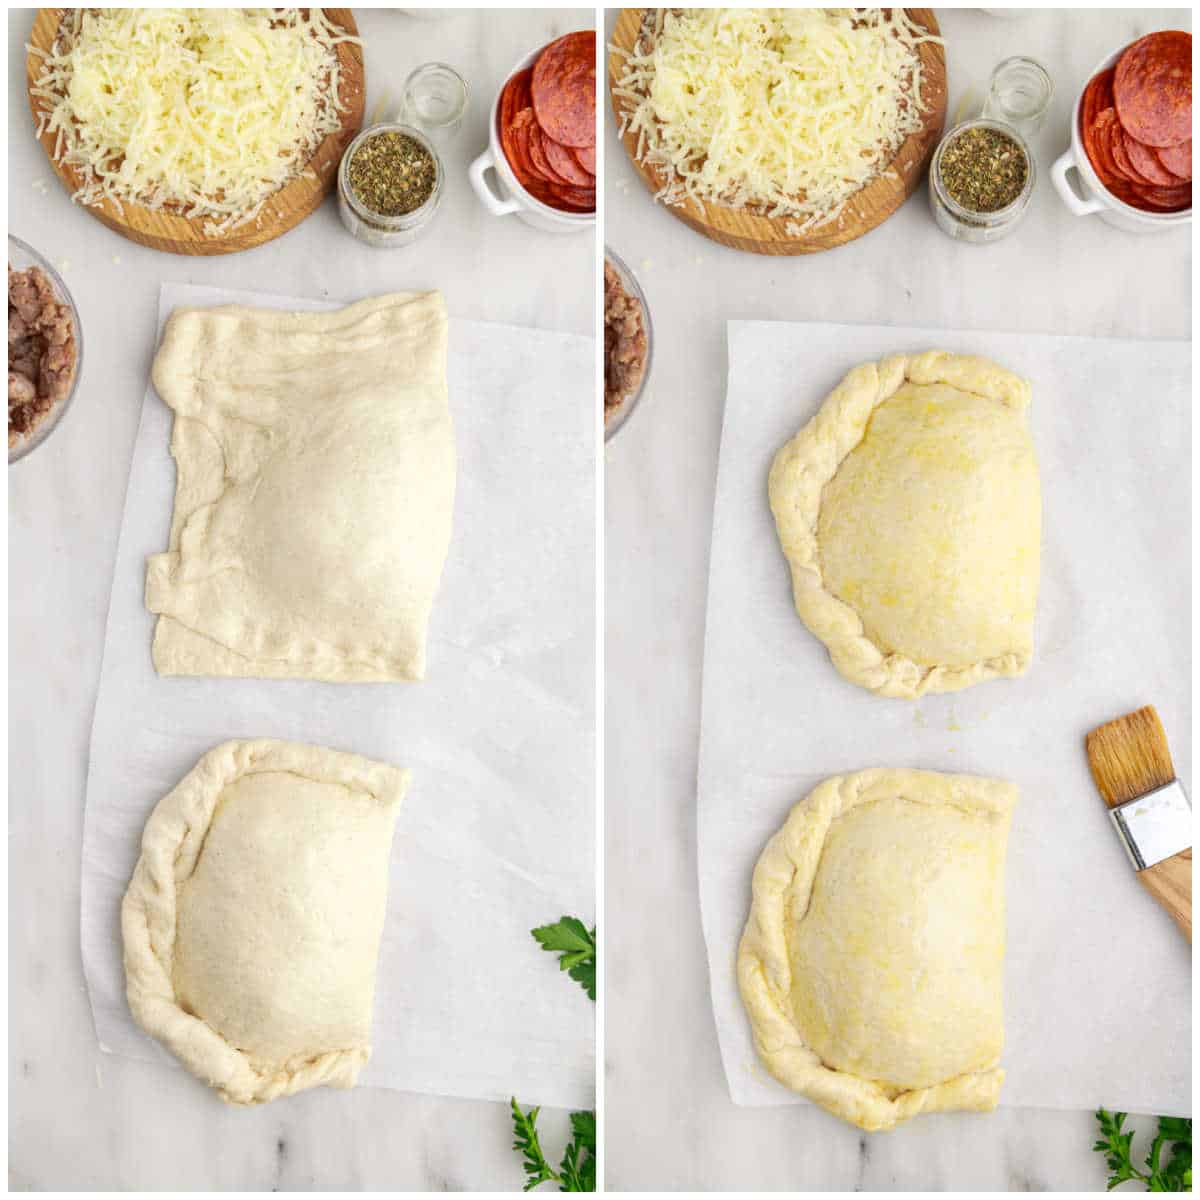 Steps to make meat calzone.